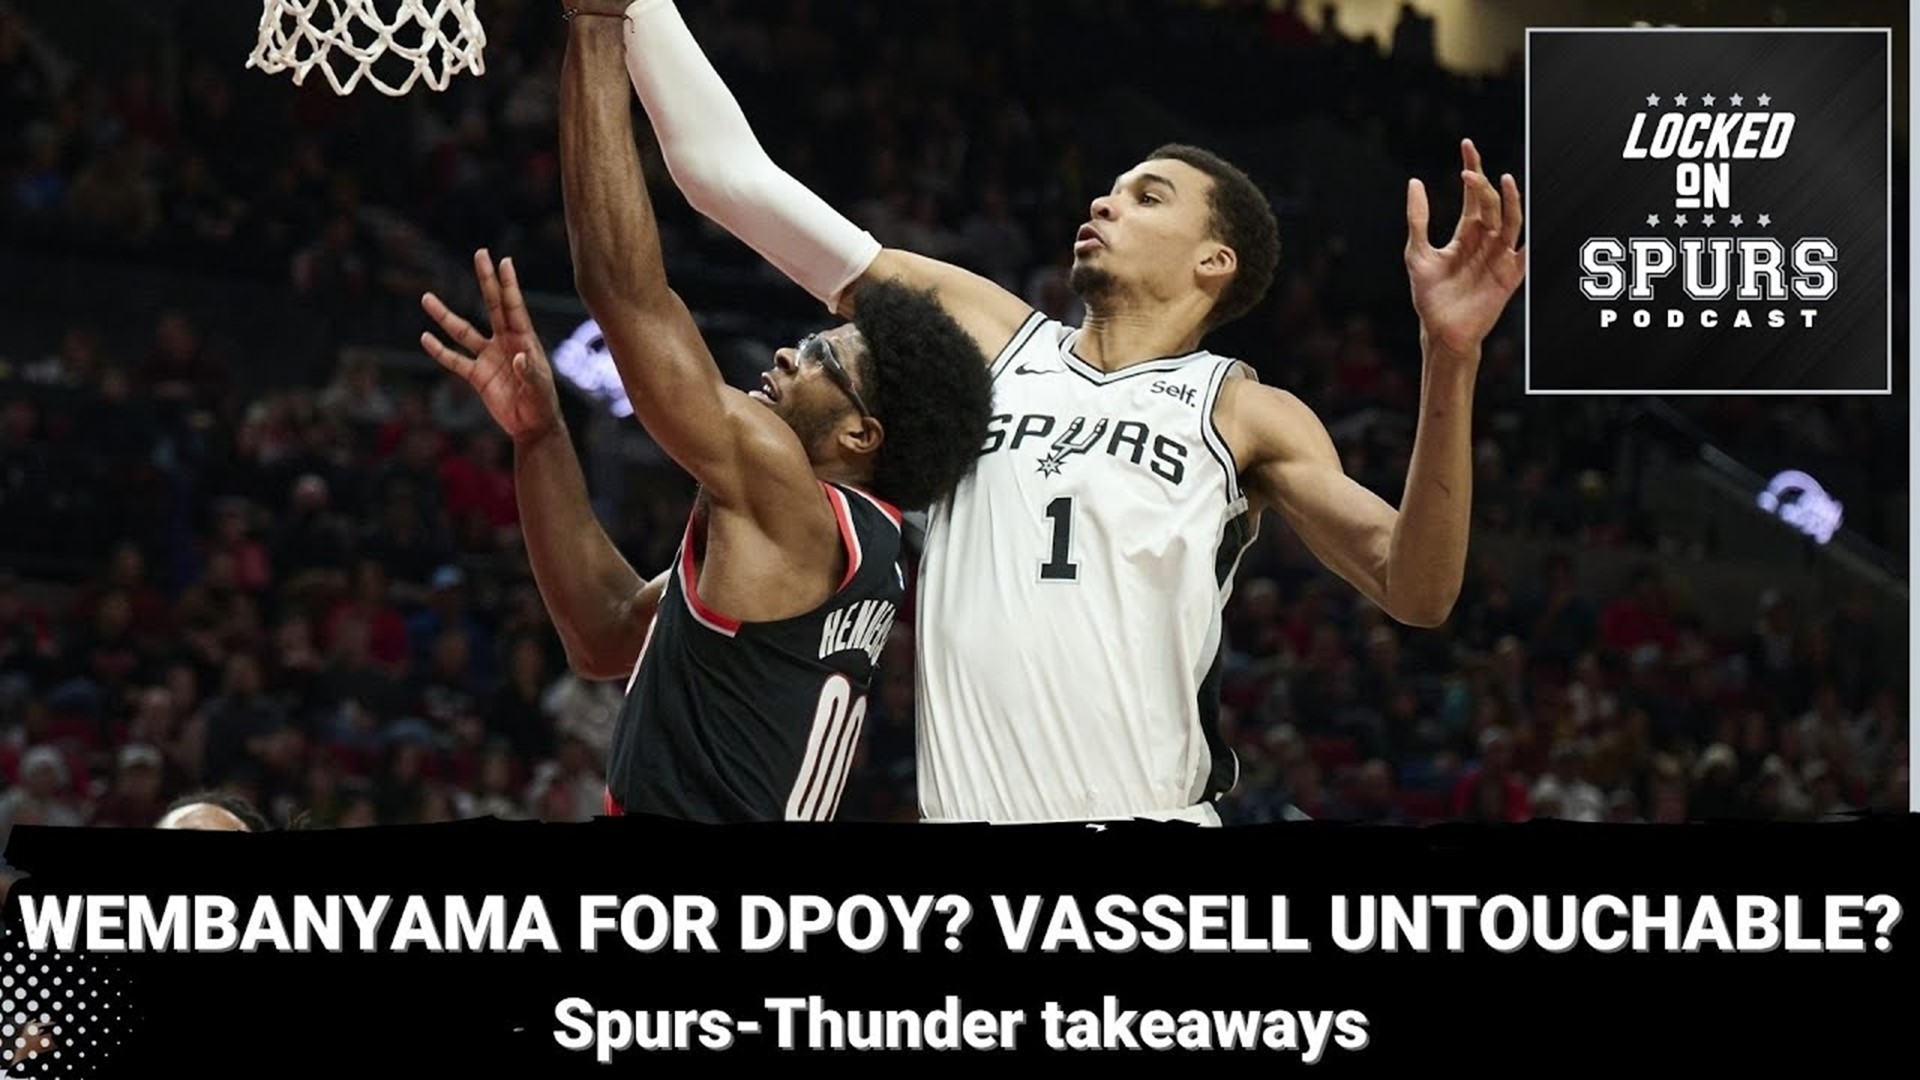 On this episode of Locked On Spurs, host Jeff Garcia and KENS 5's Vinne Vinzetta give their takeaways from the San Antonio Spurs win versus the Thunder.